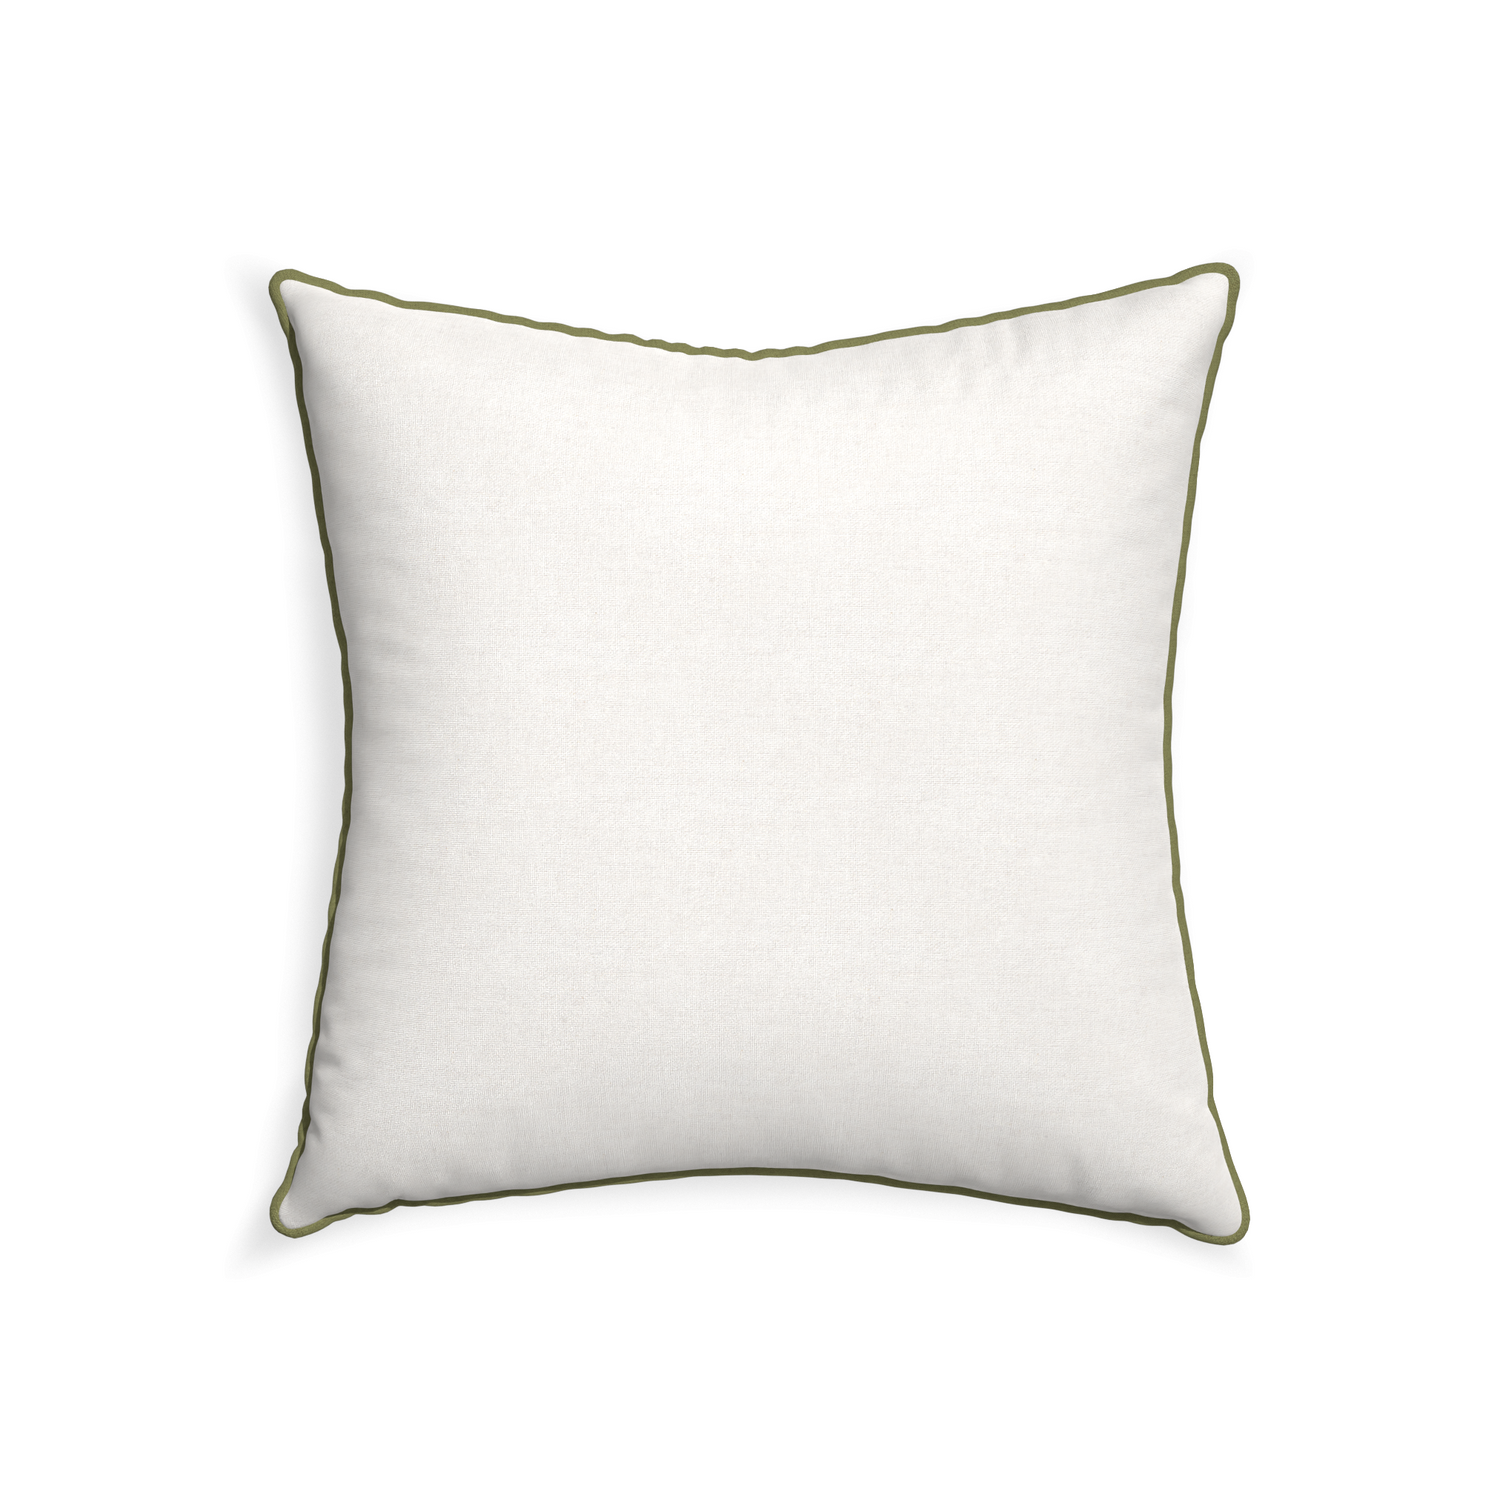 square natural white pillow with moss green piping